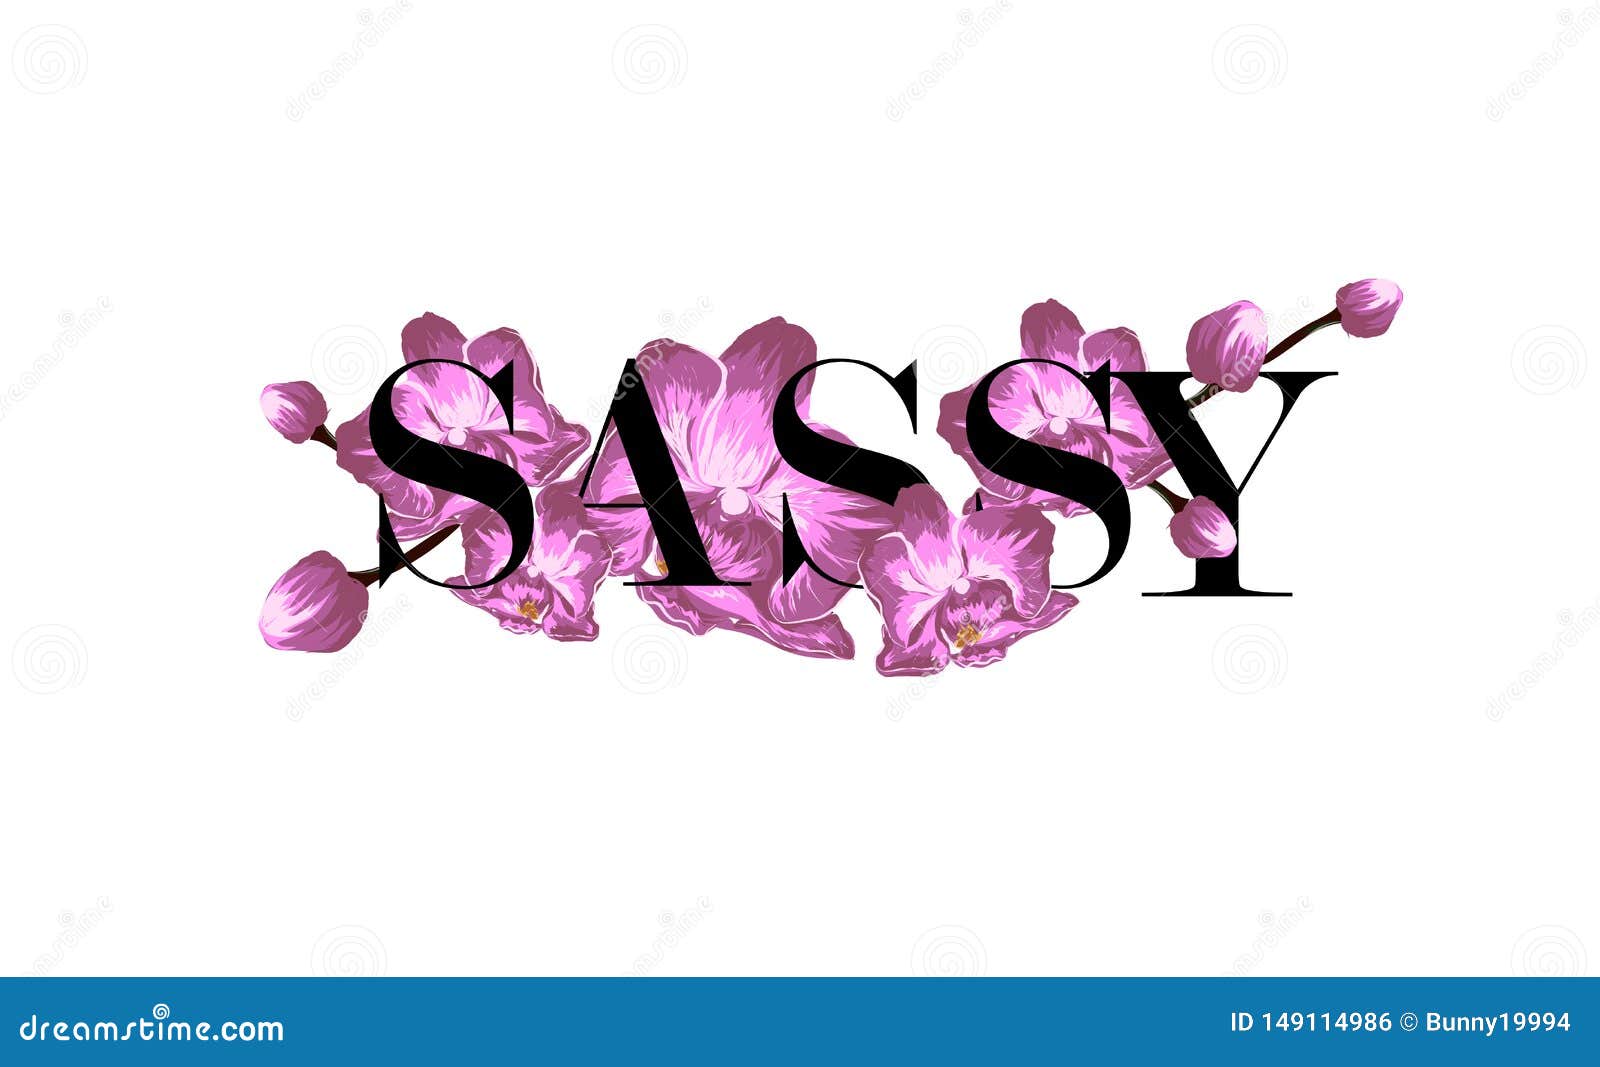 sassy slogan with orchids.